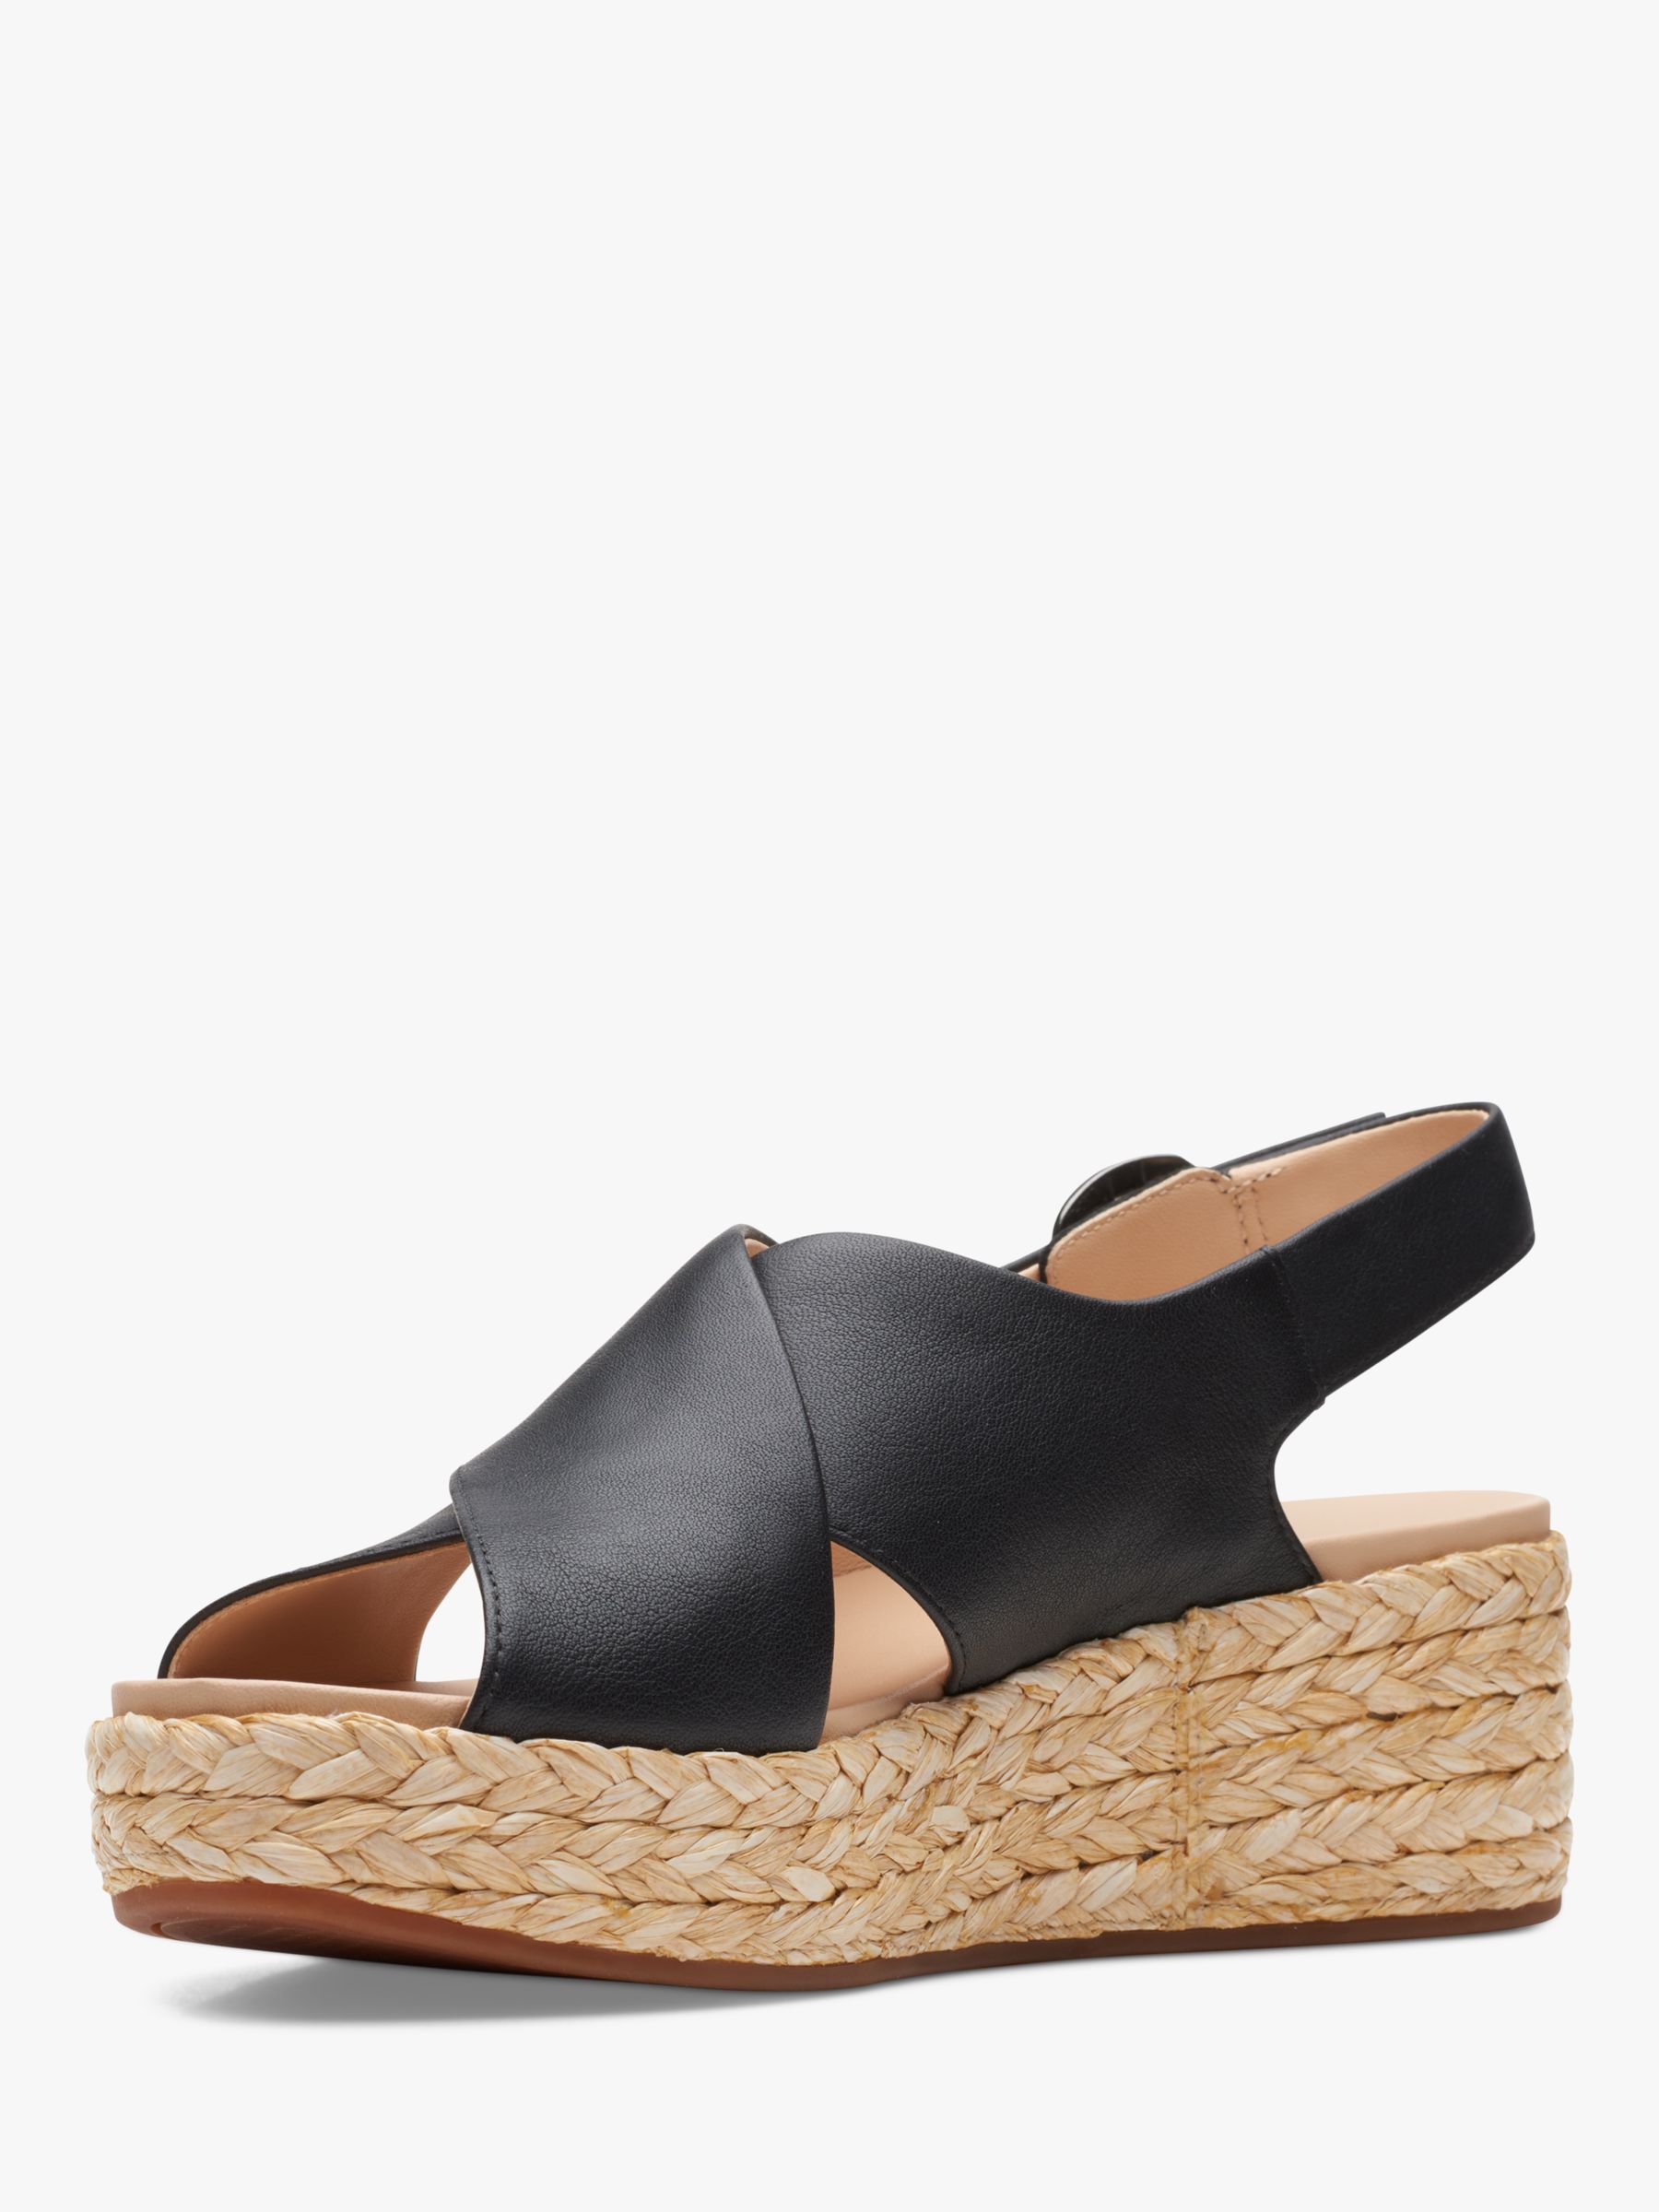 Clarks Kimmei Cross Leather Wedge Sandals, Black at John Lewis & Partners